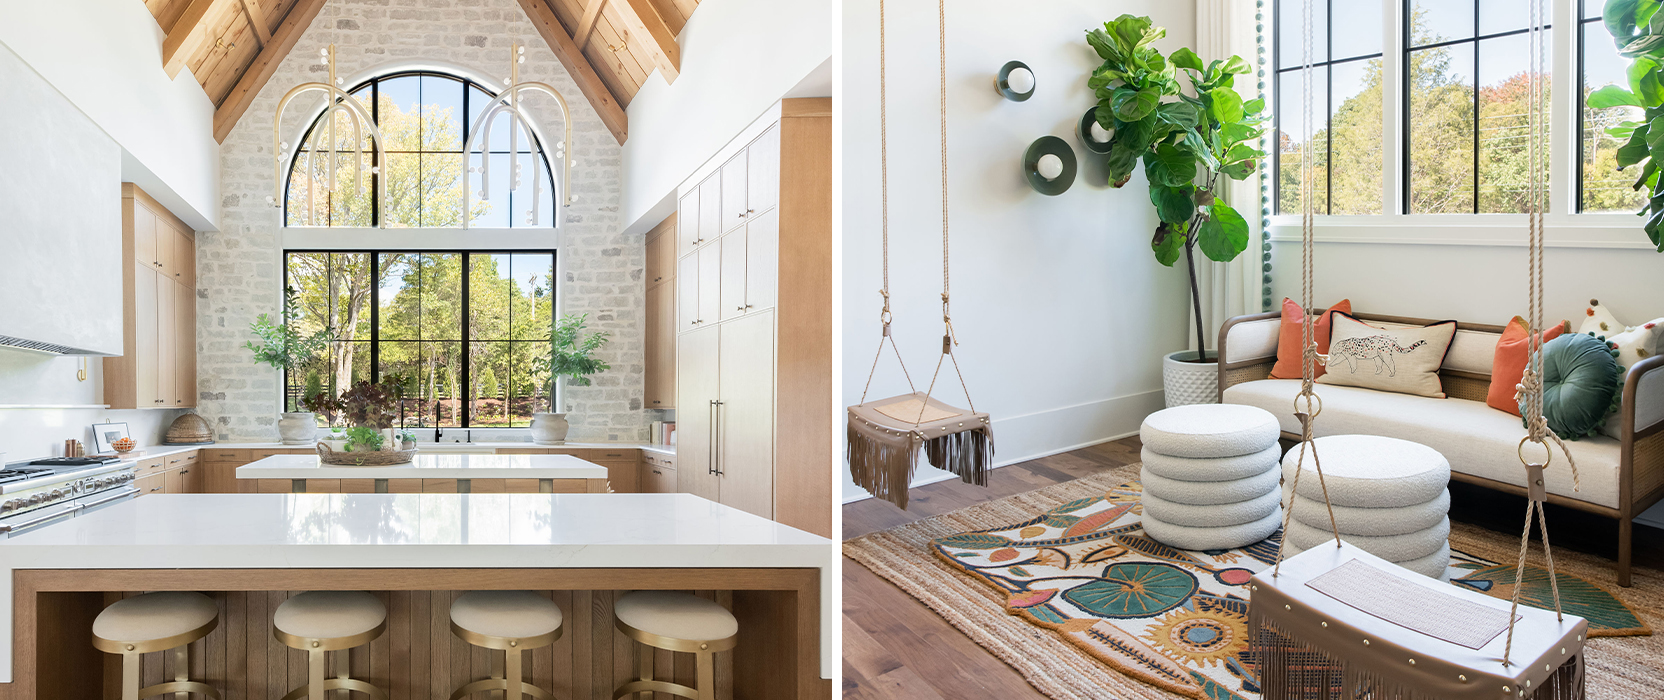 Left image: Beautiful kitchen with high vaulted ceilings, sleek white countertops and island, light wood cabinetry and enormous arched window letting in natural light.  Right image: Sitting area with white-cushioned wood settee flanked by potted tall fiddle leaf fig plants, layered bohemian style rugs and two tasseled leather indoor swings in the foreground.